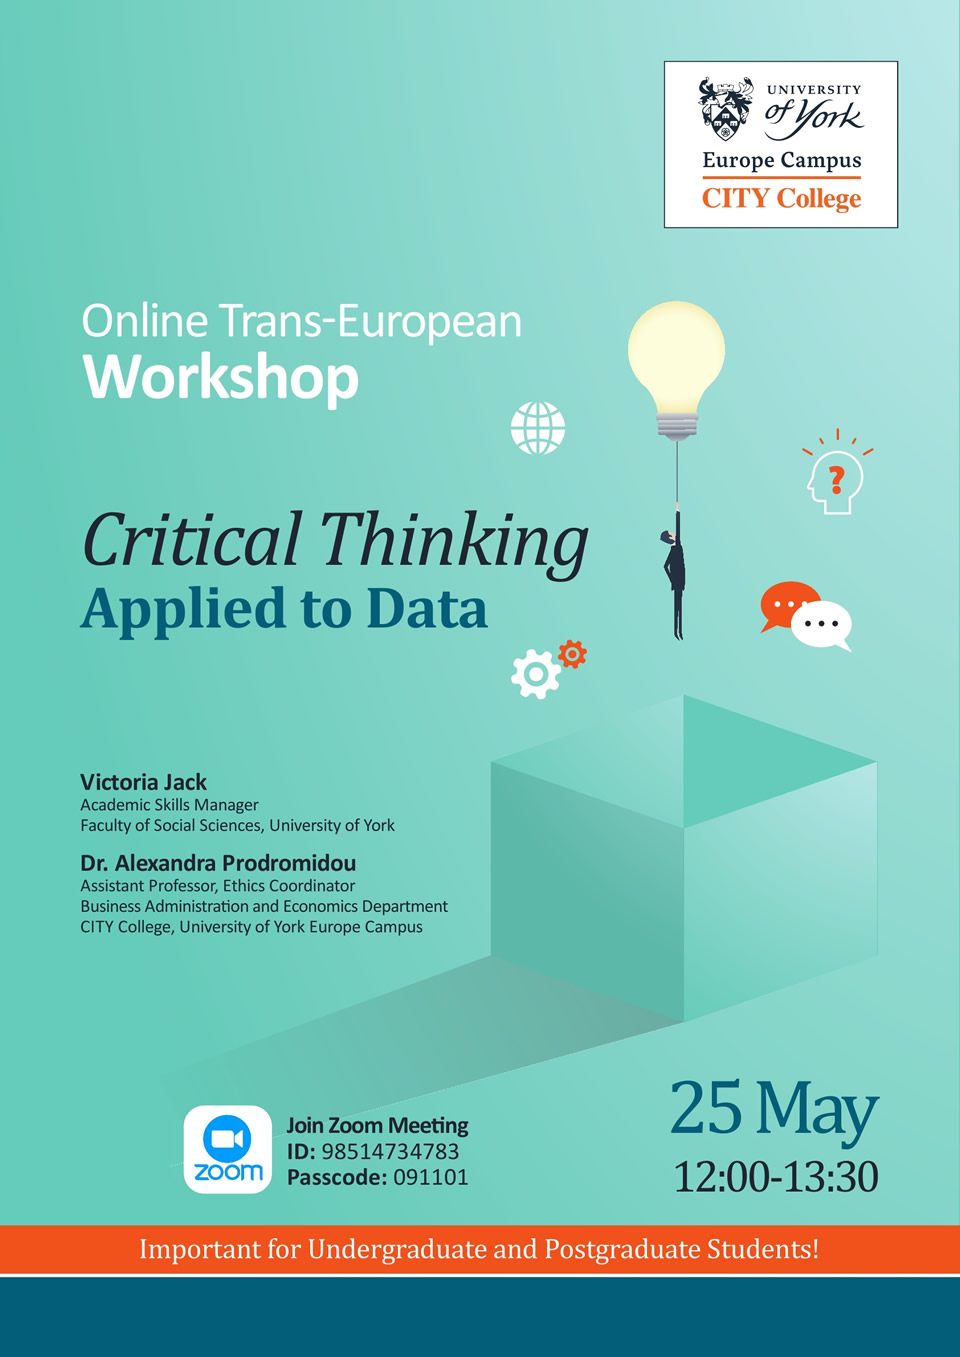 Online Trans-European Workshop: Critical Thinking Applied to Data